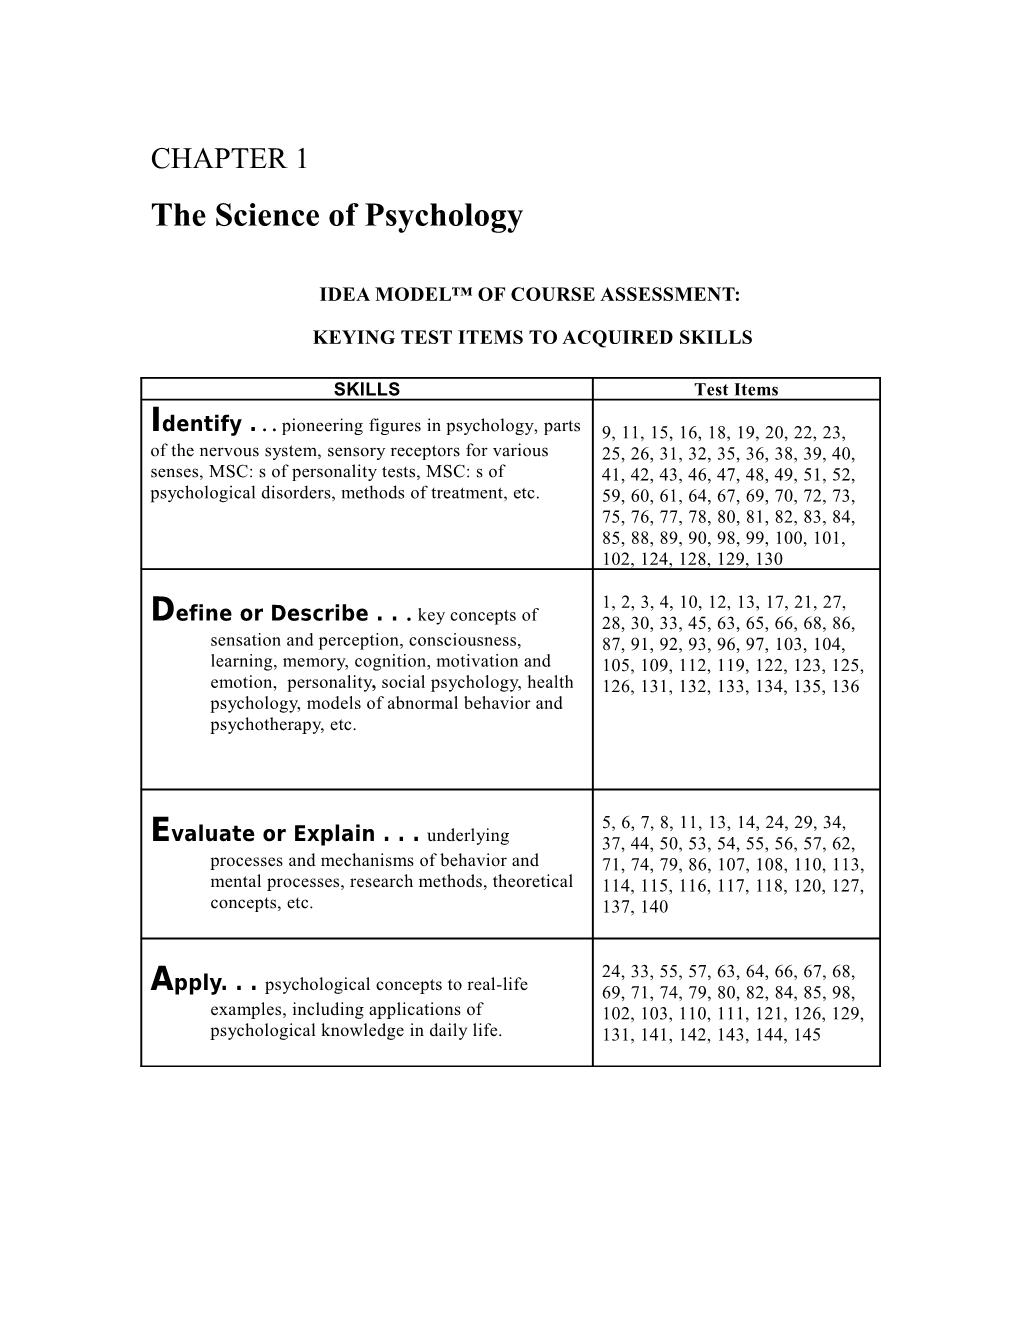 Chapter 1: the Science of Psychology 1